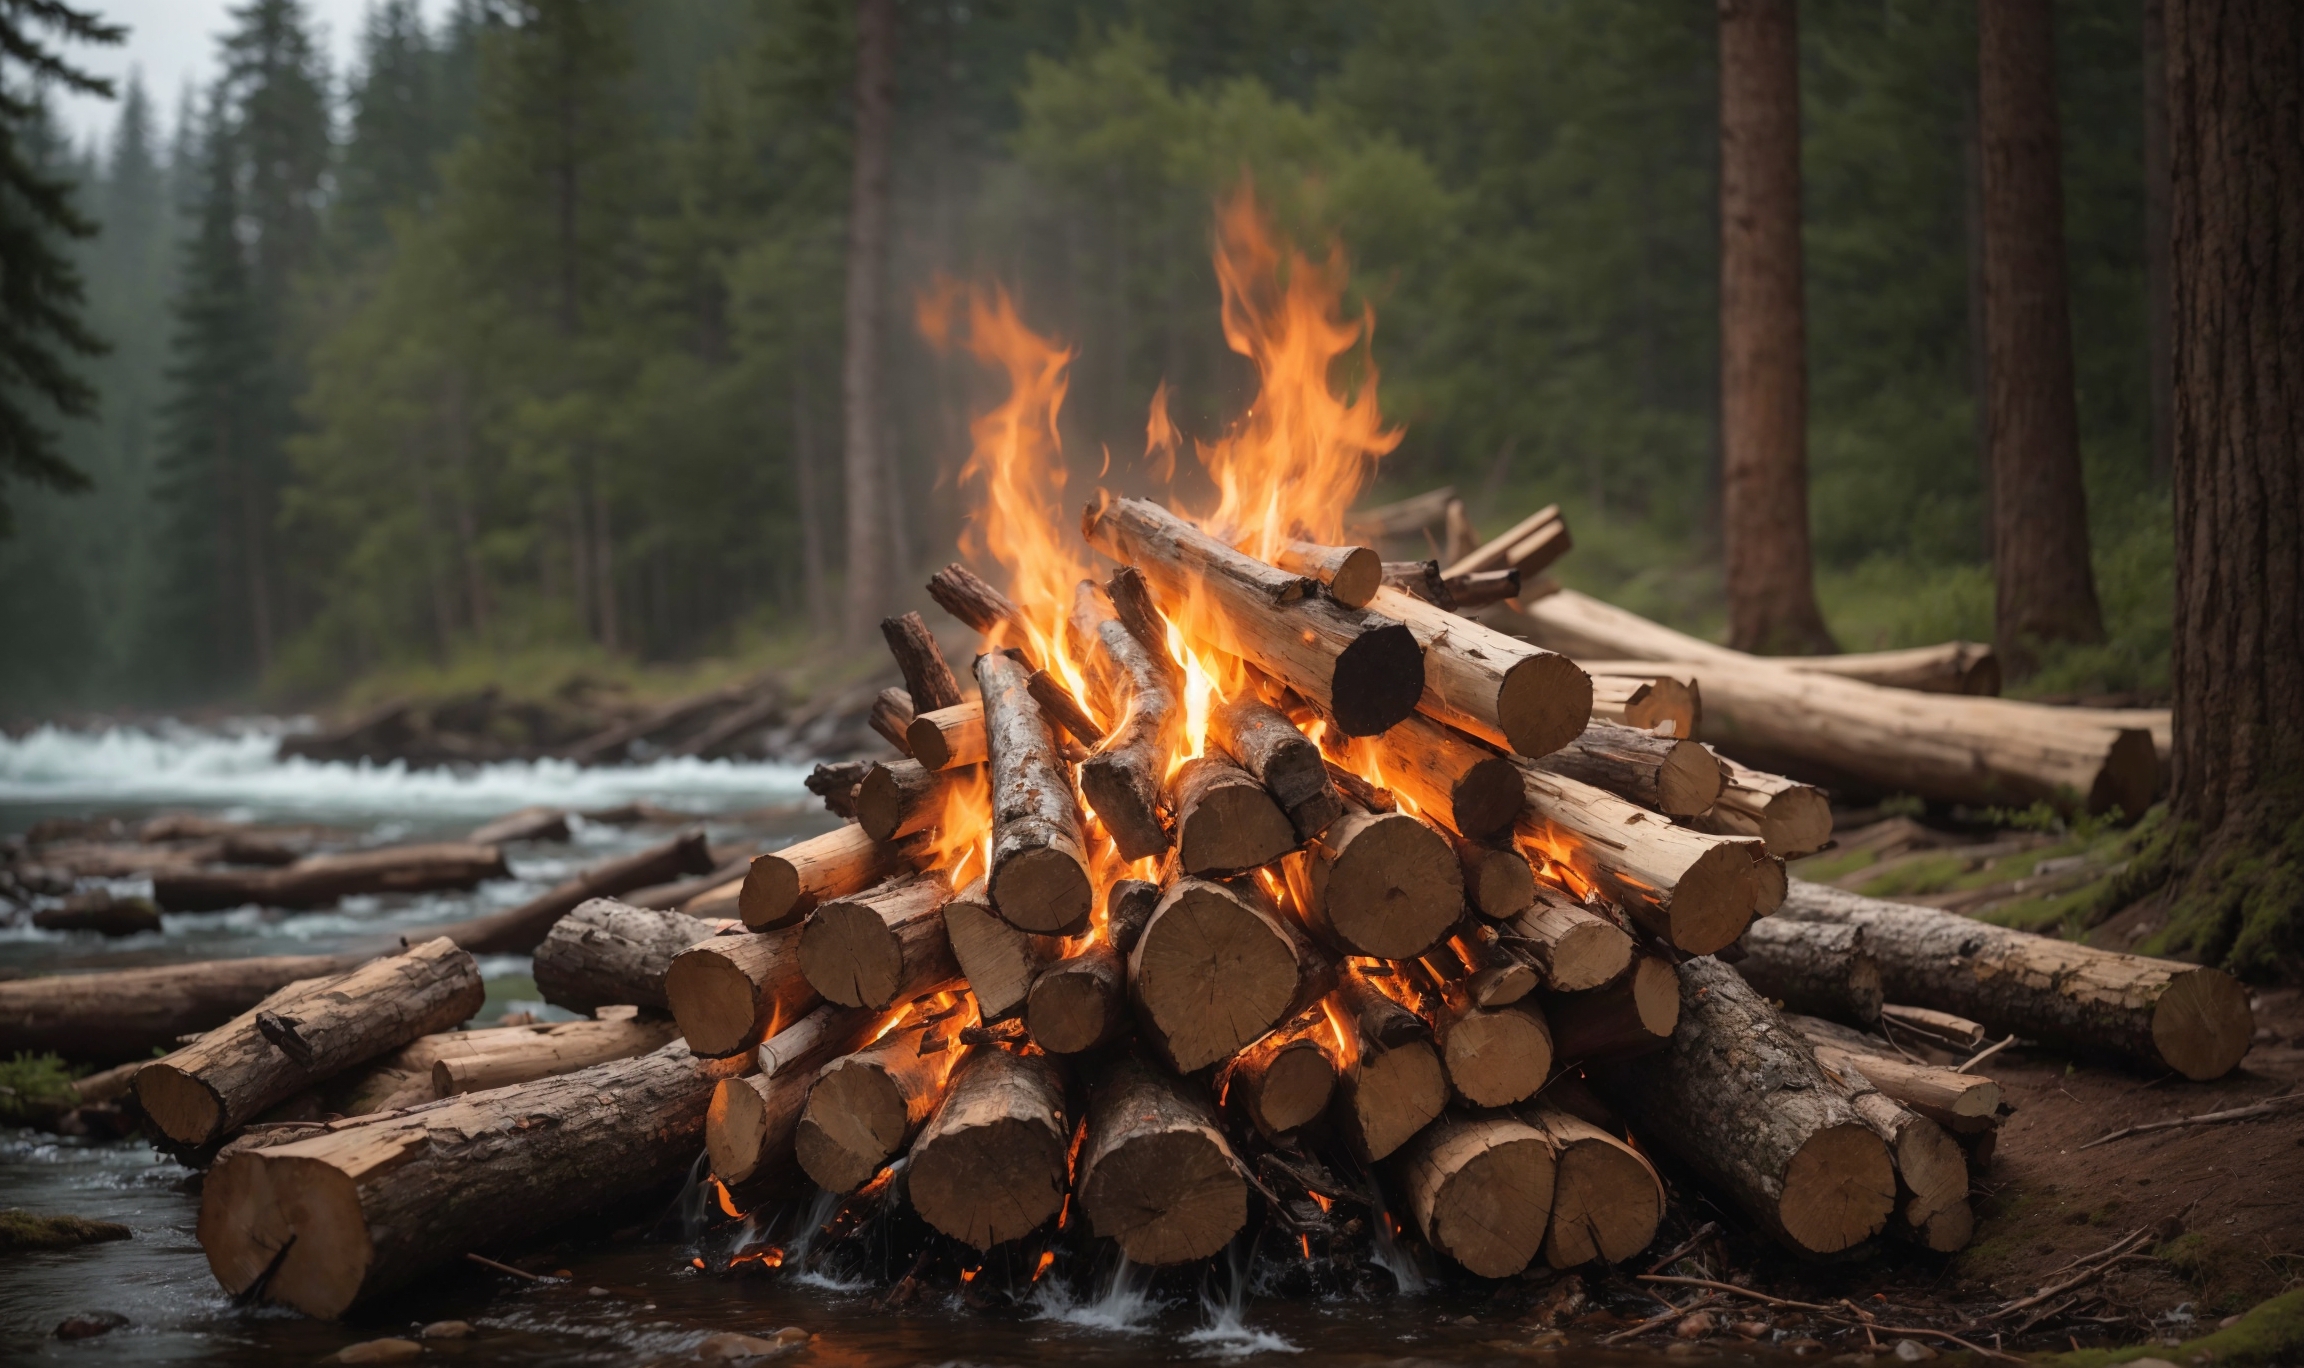 Firewood for Camping